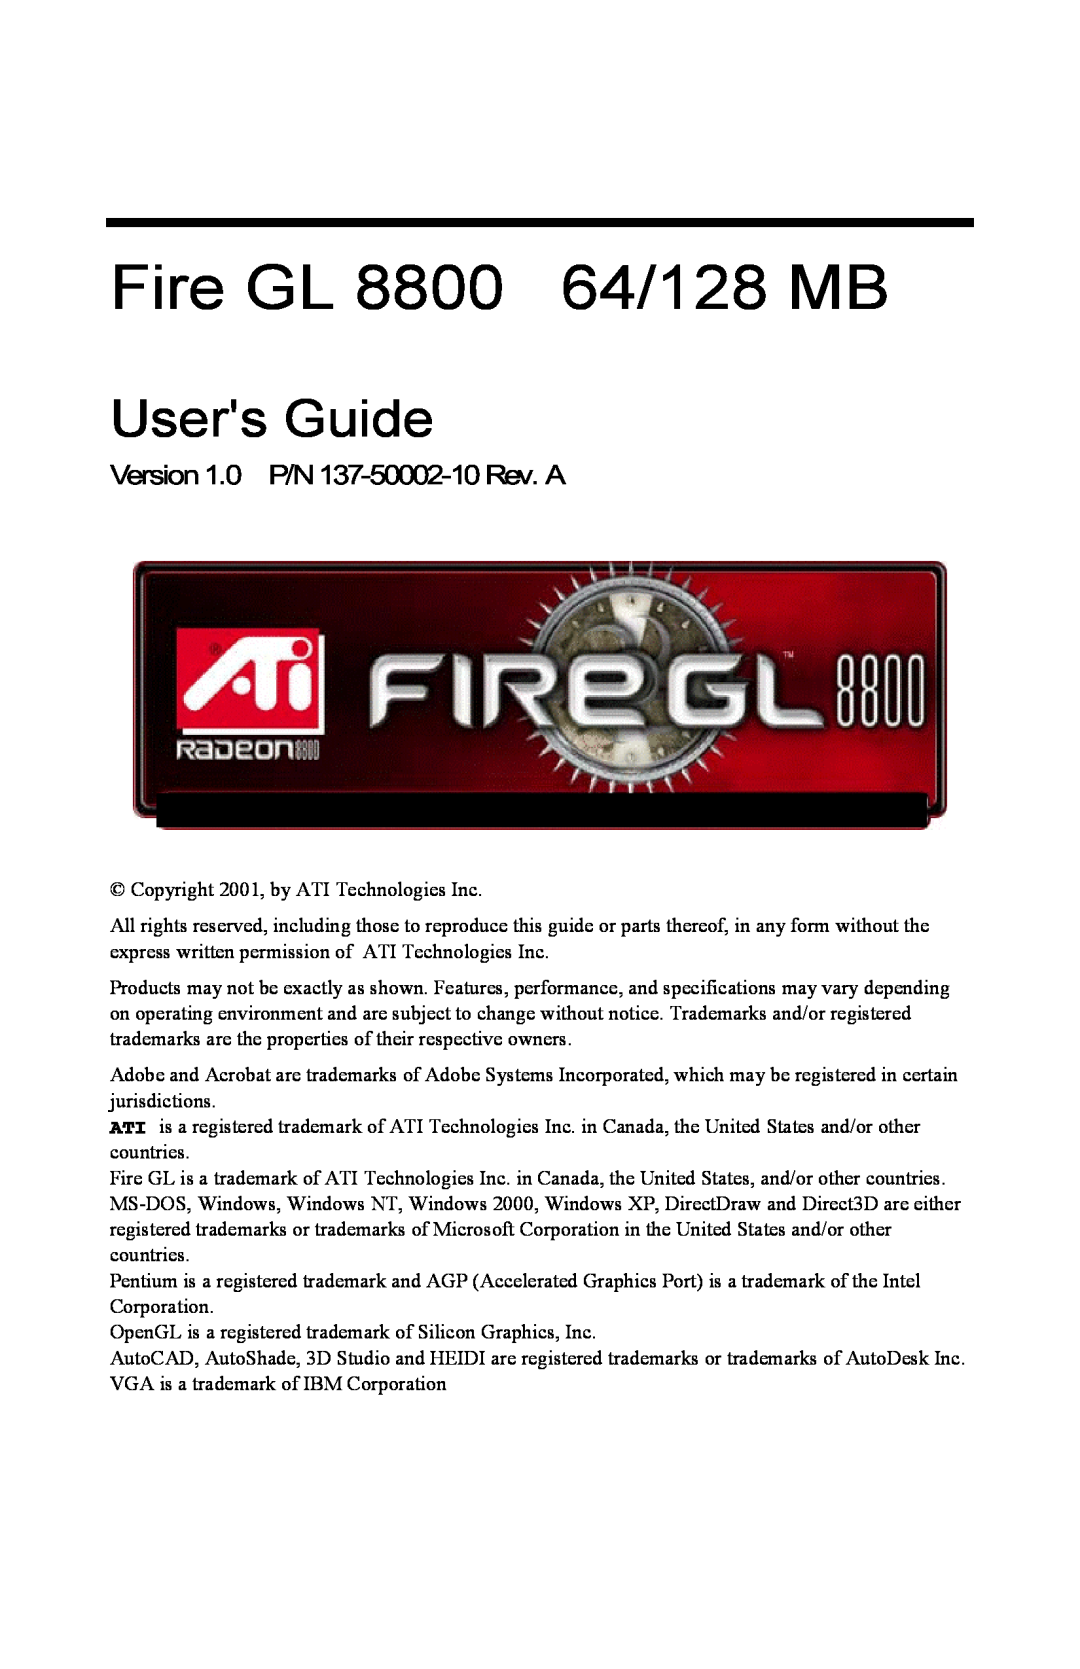 ATI Technologies specifications Fire GL 8800 64/128 MB, Users Guide 